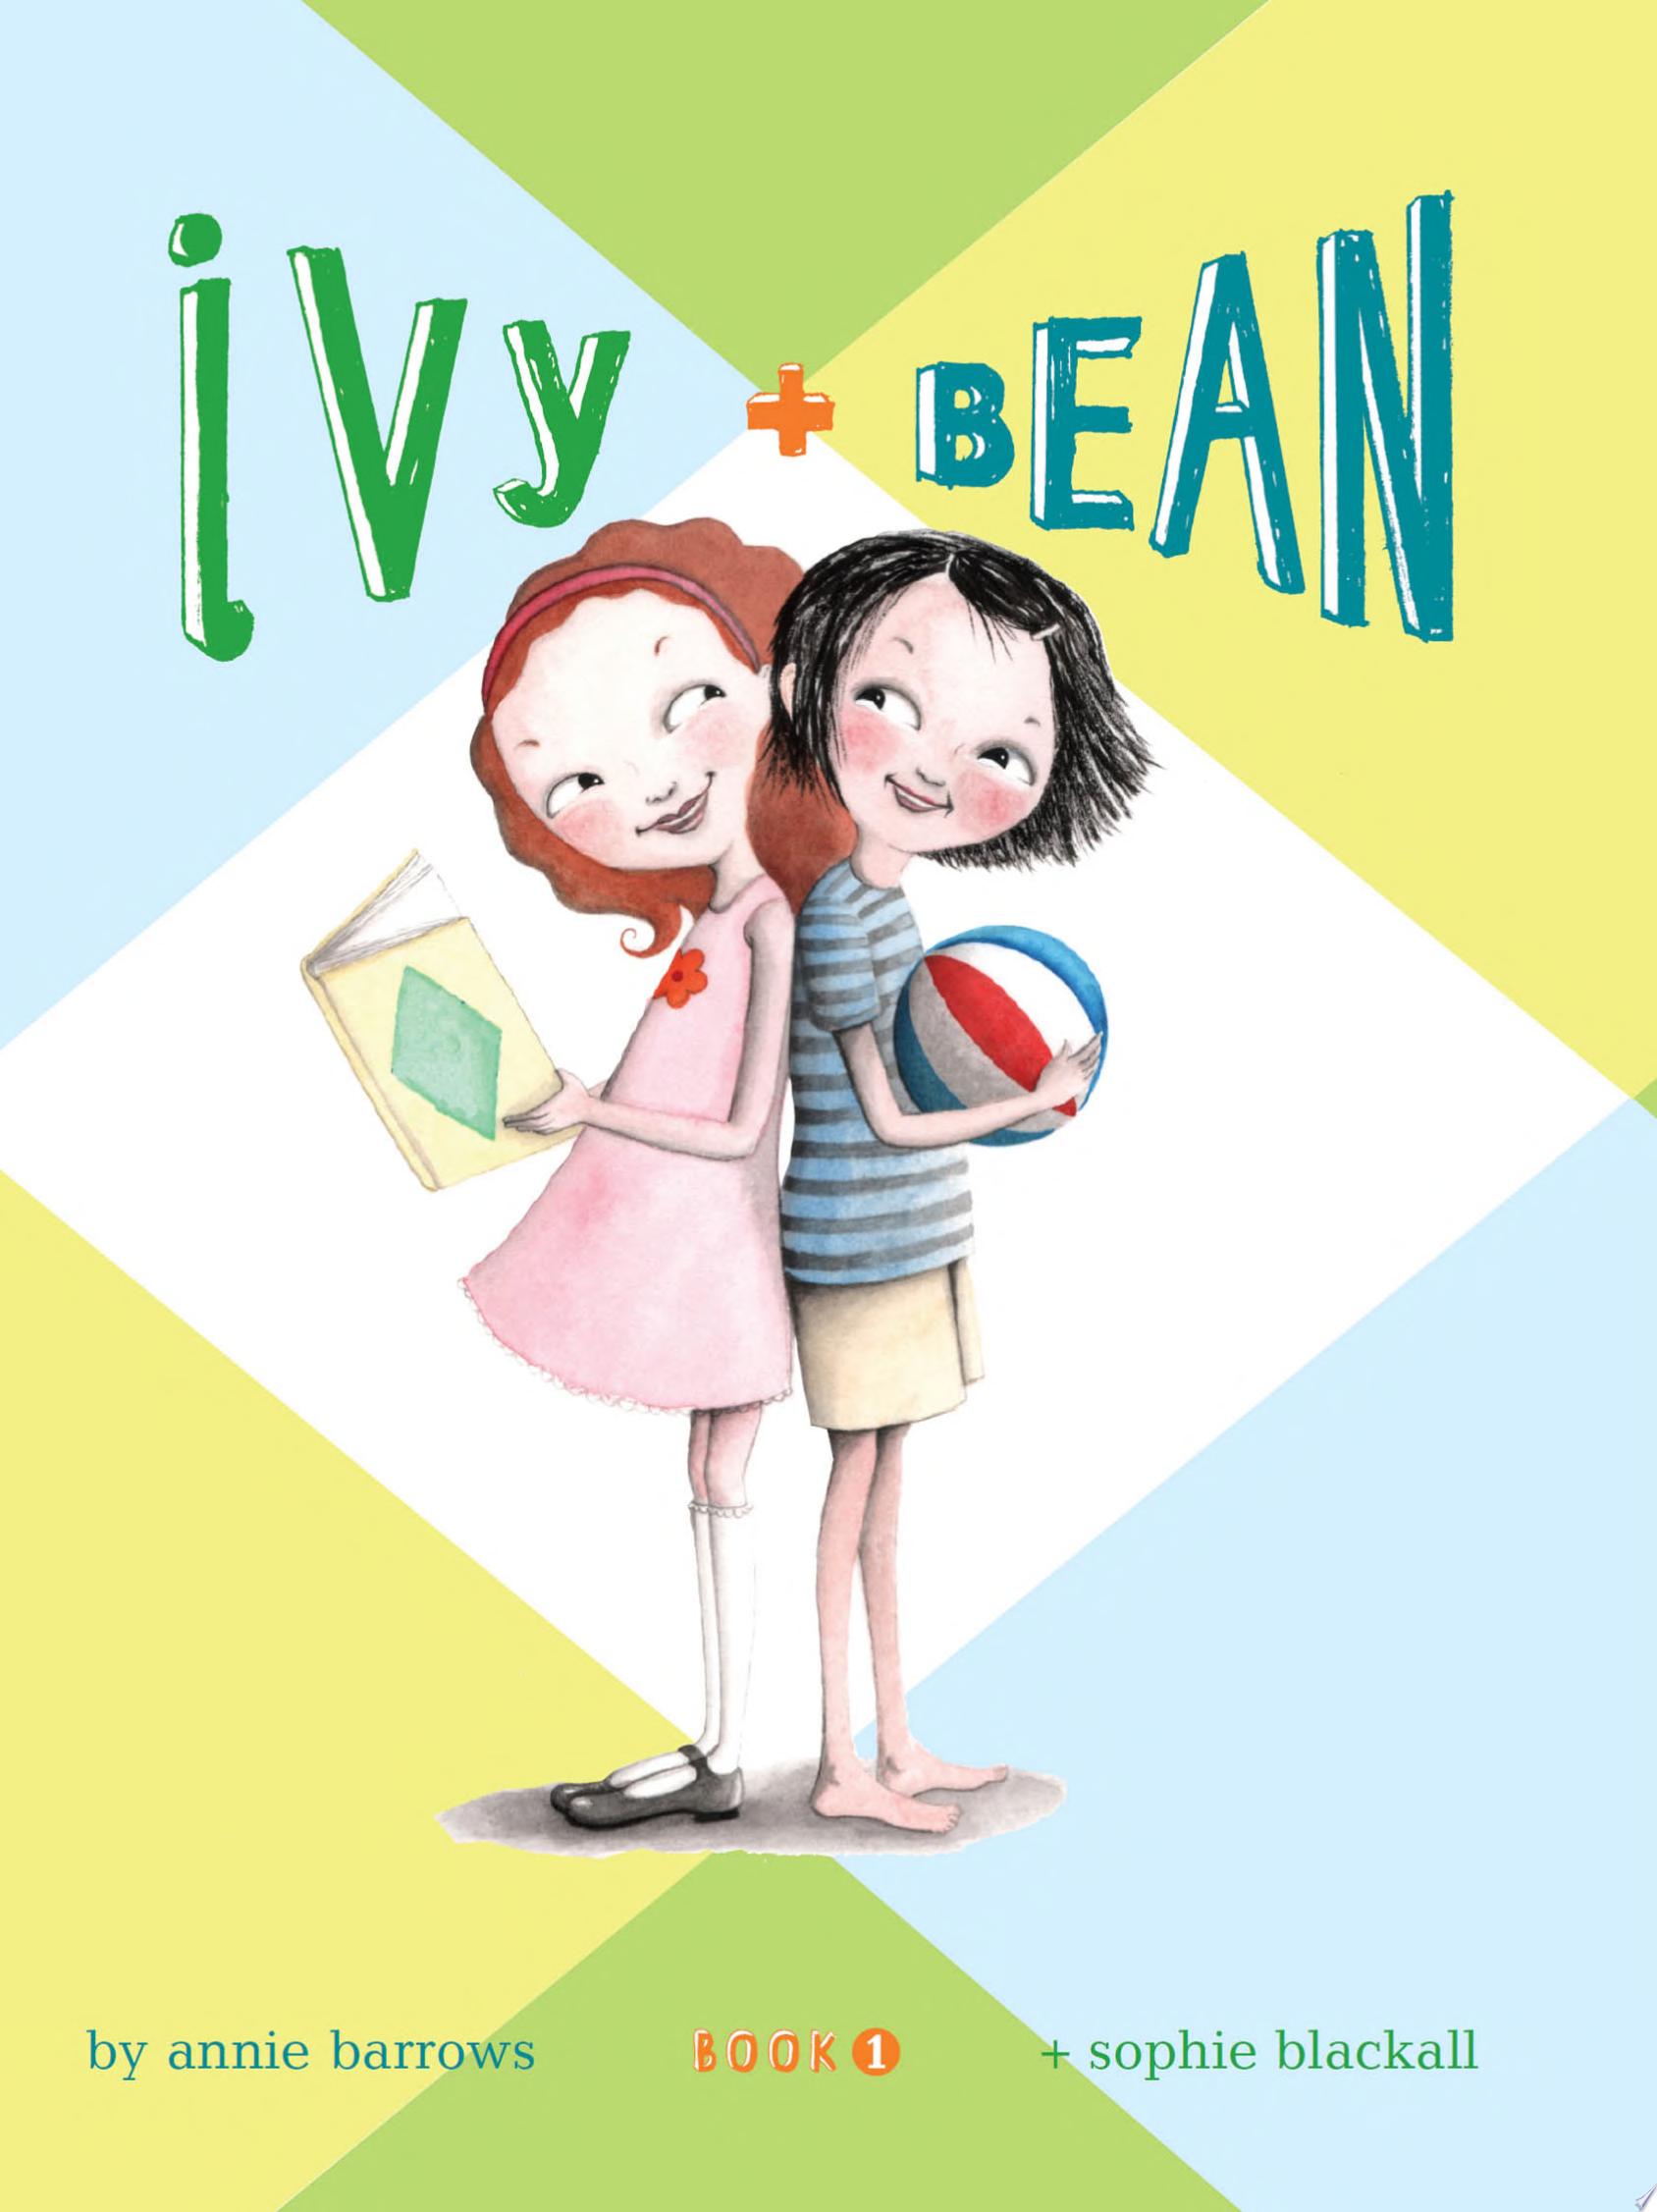 Image for "Ivy and Bean"